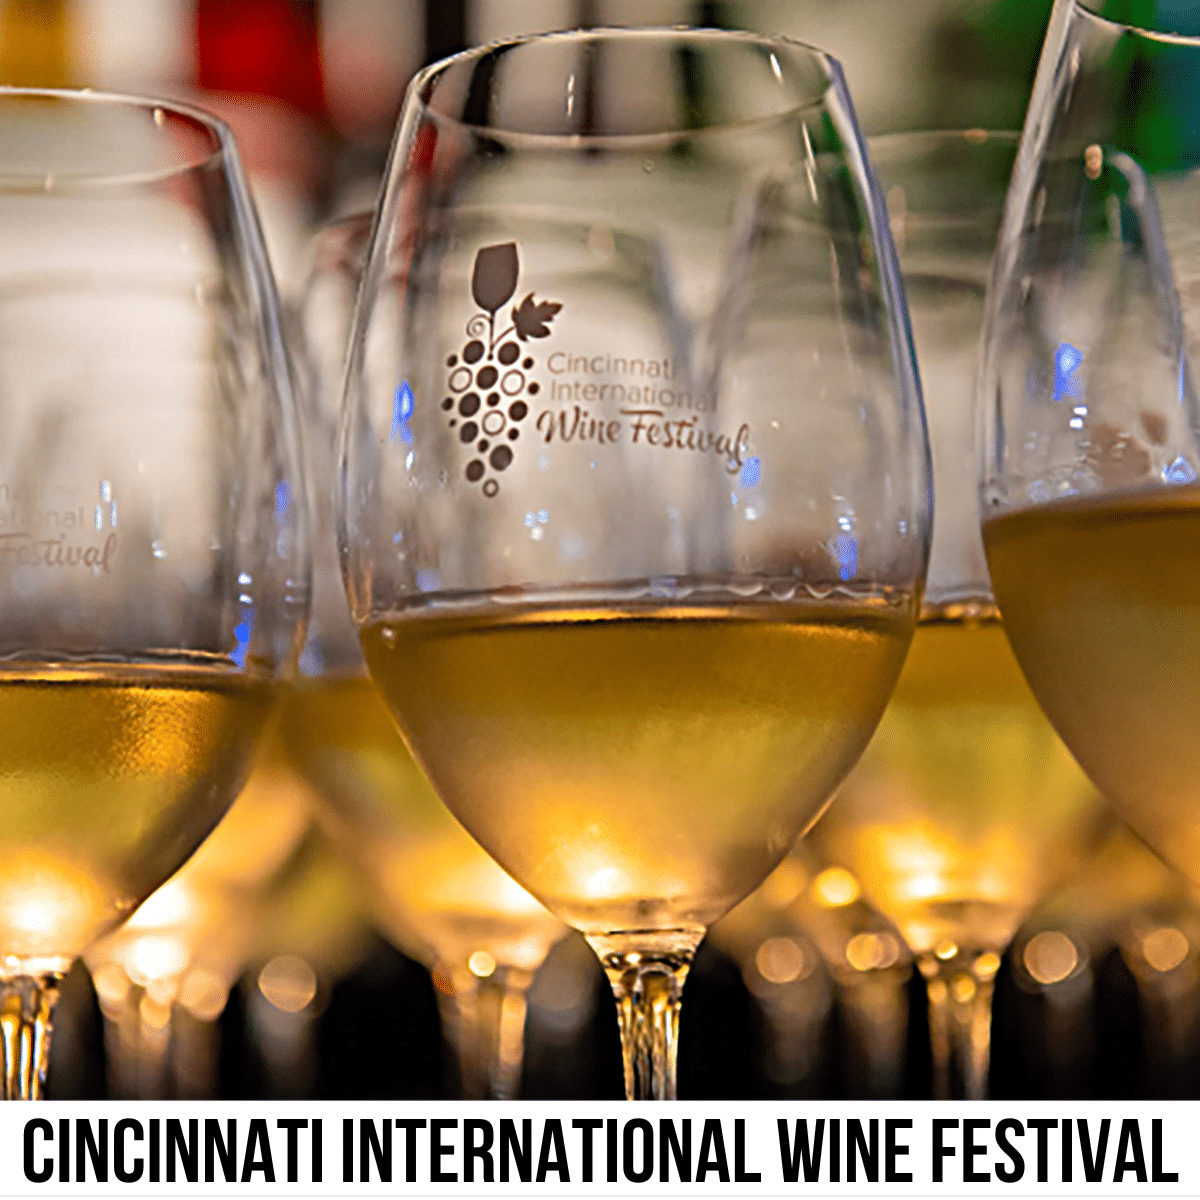 square image of a photo of the tops of multiple wine glasses half-filled with a yellow liquid. A white strip across the bottom has text that says Cincinnati International Wine Festival.